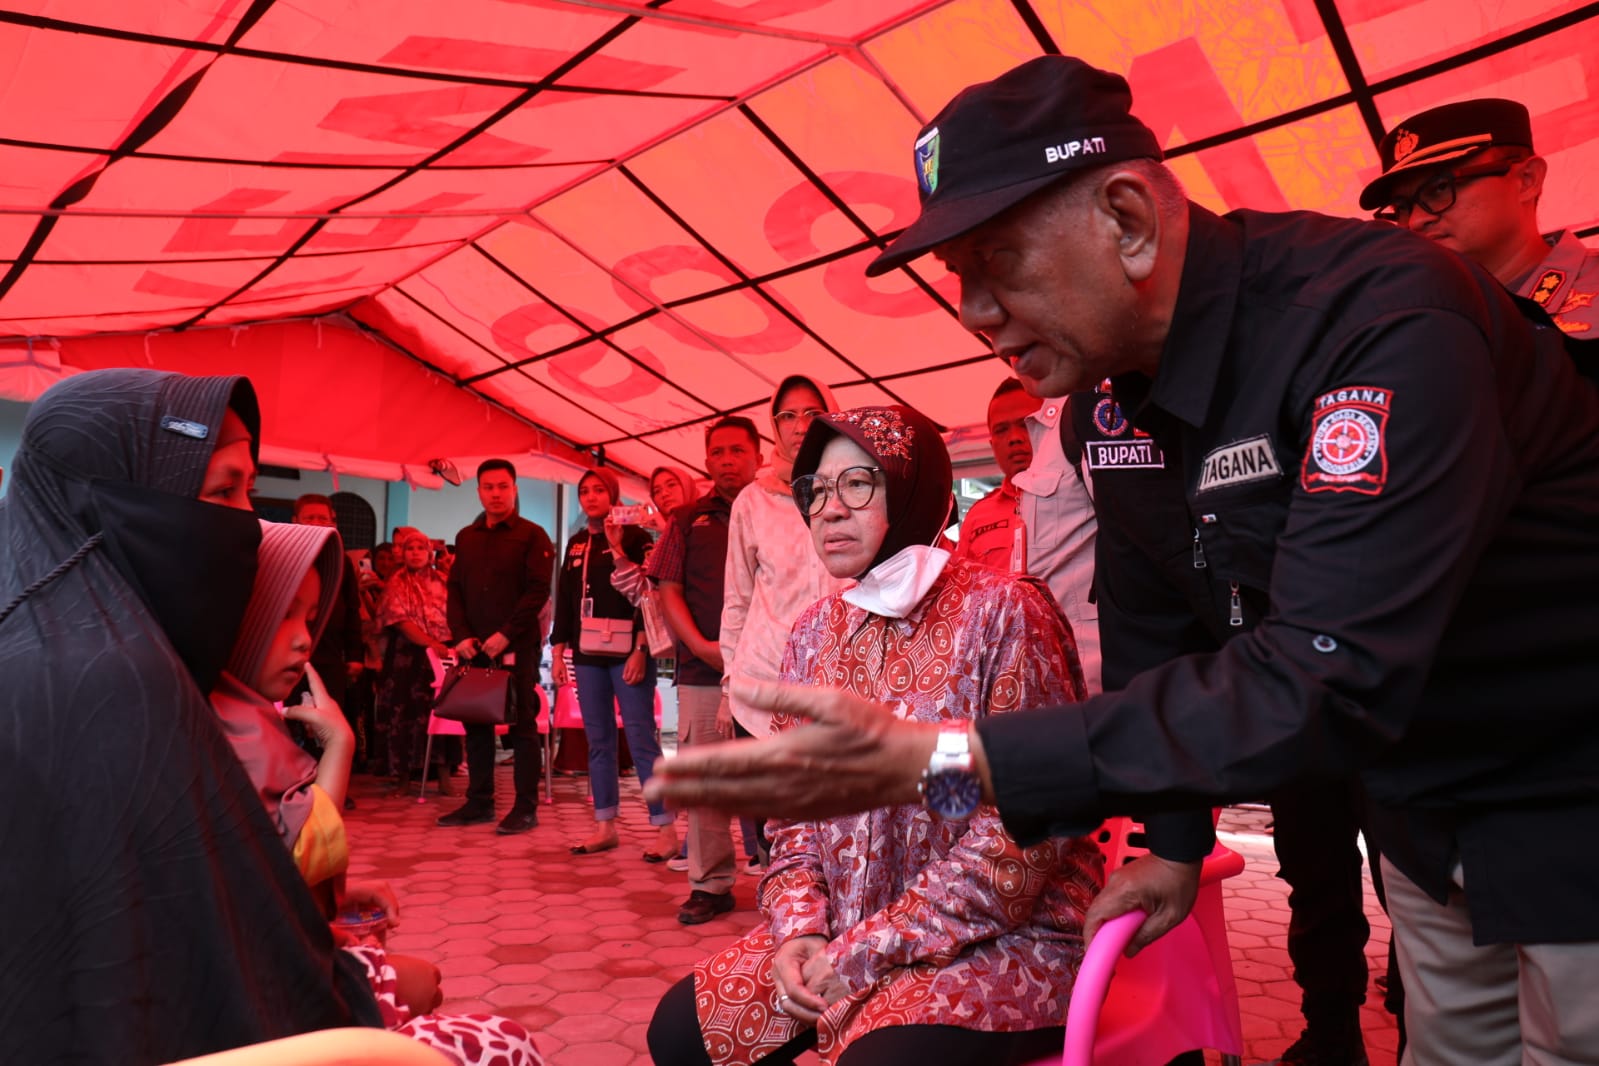 Ministry of Social Affairs Distributes Compensation for Flood Victims in Pesisir Selatan